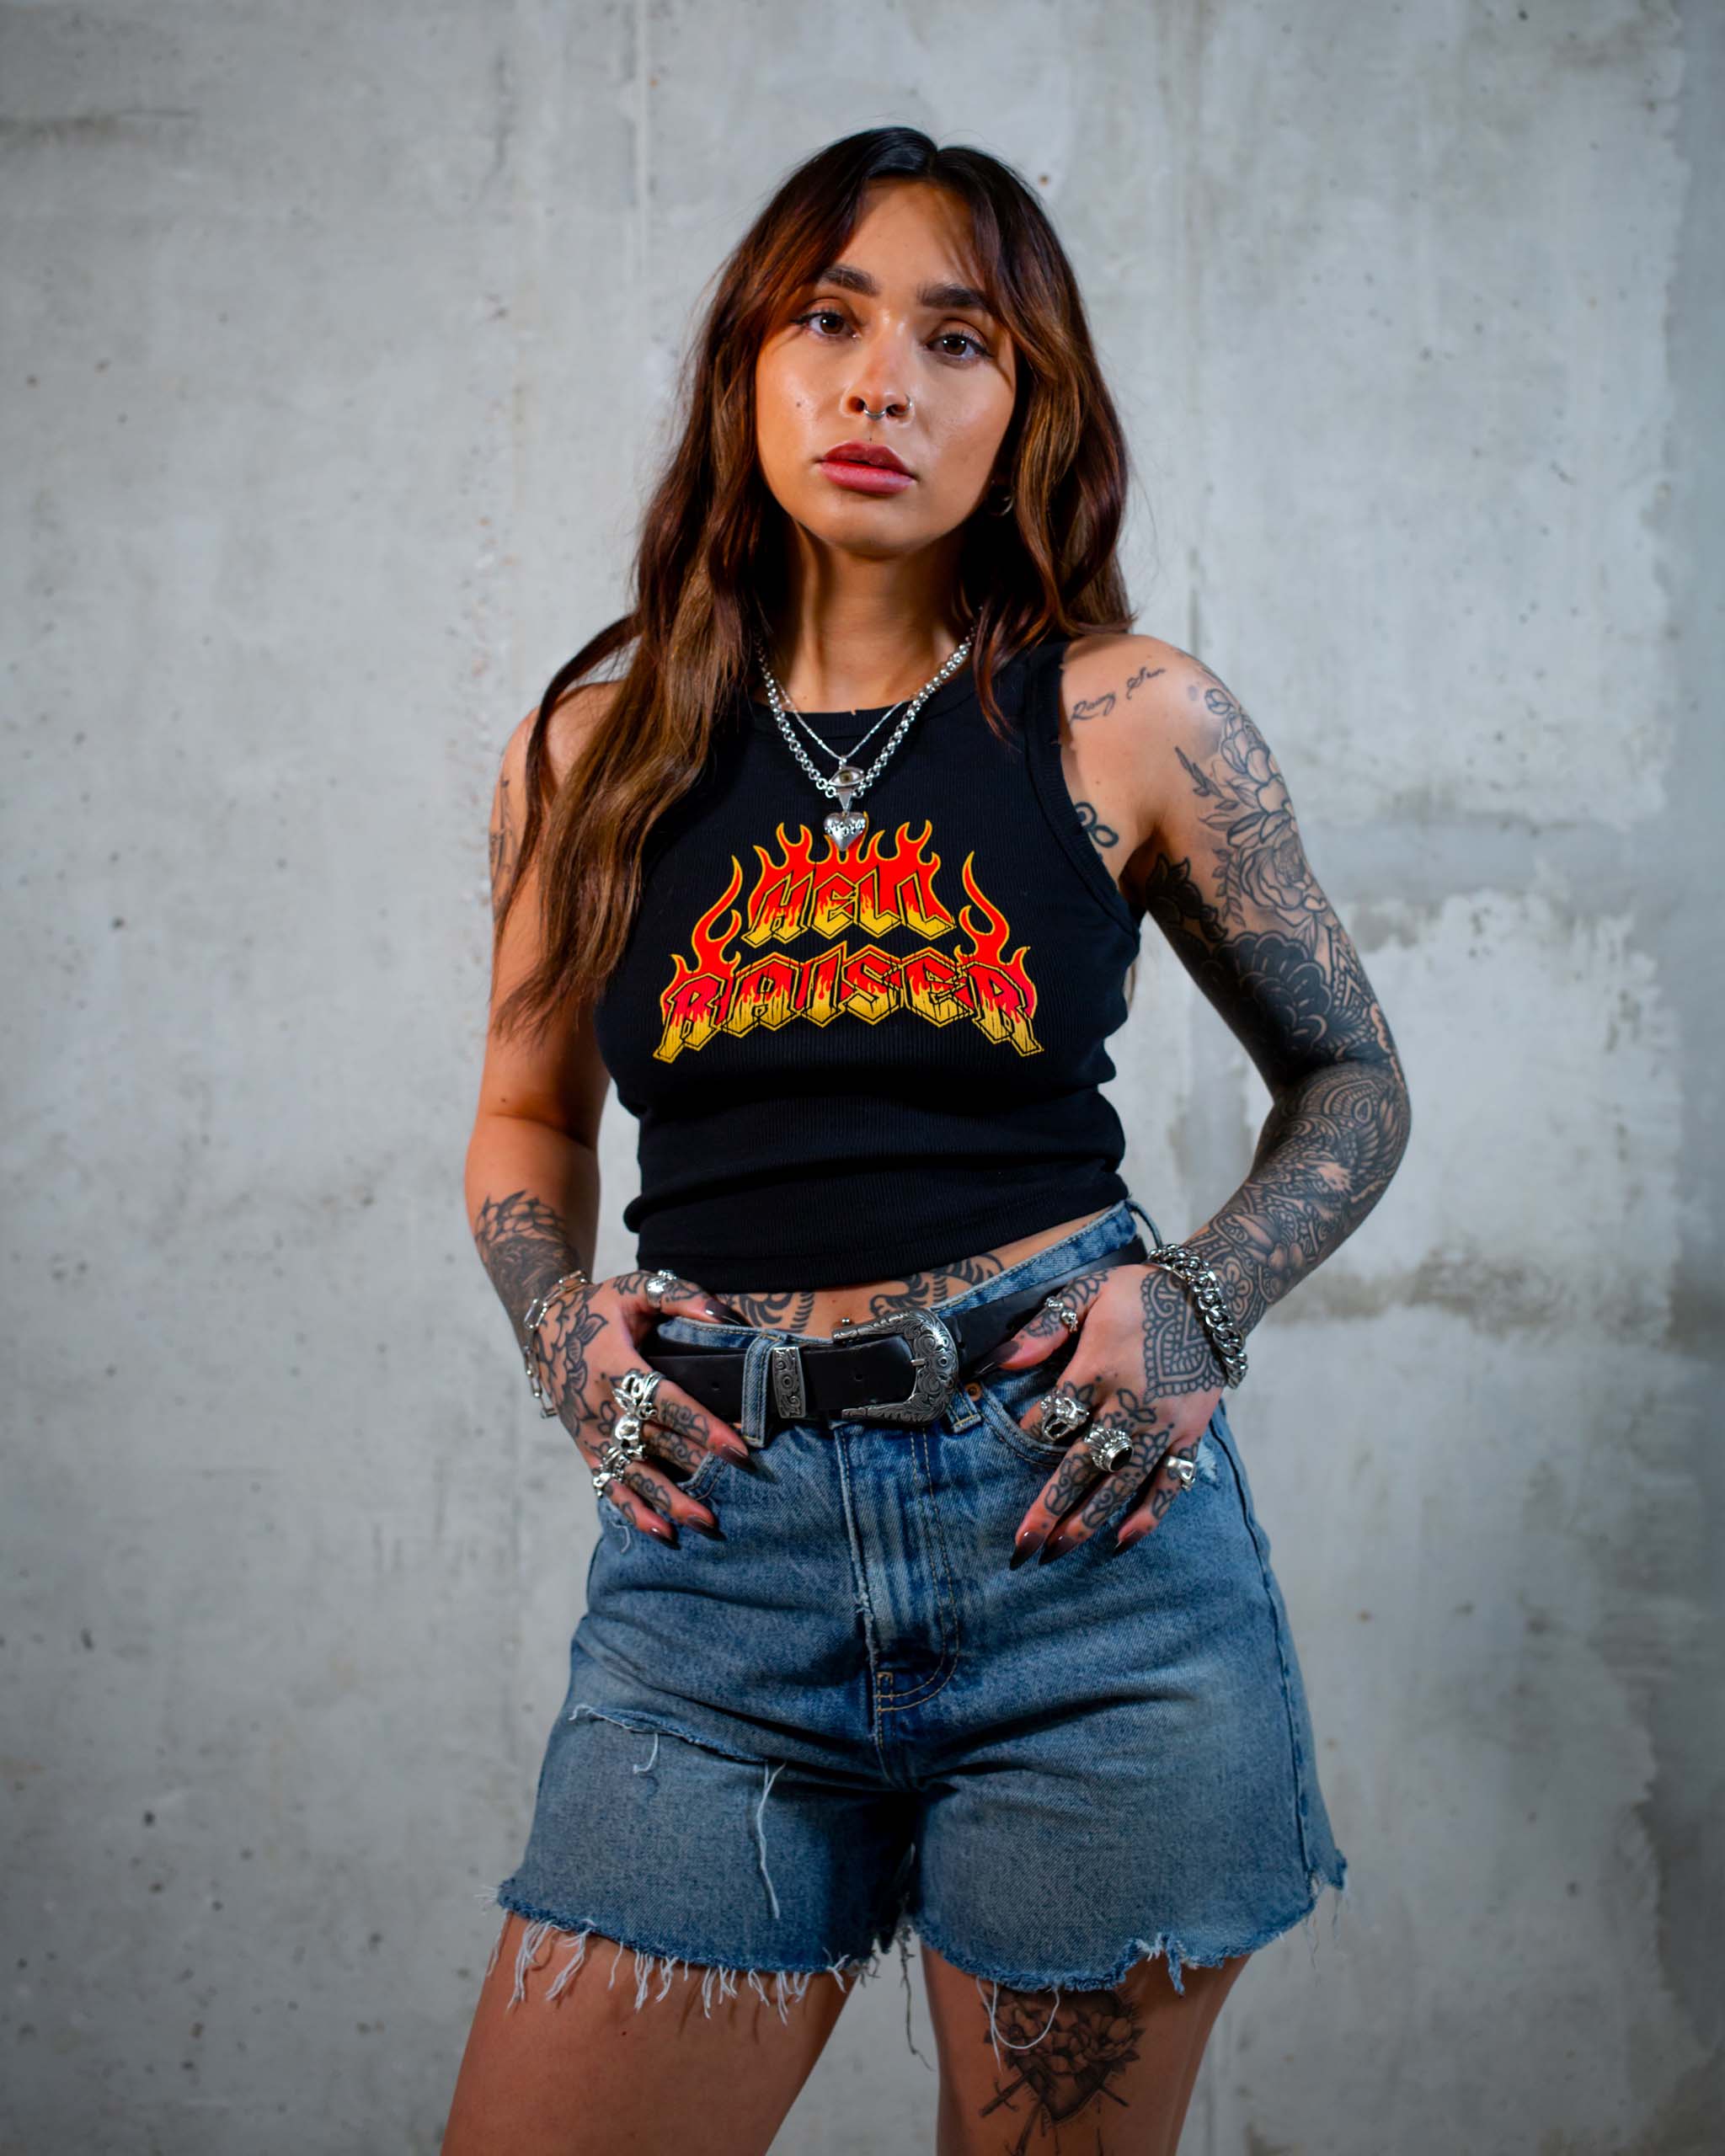 The Hell Raiser biker tank top by Sleazy Rider, featuring a flaming text graphic.